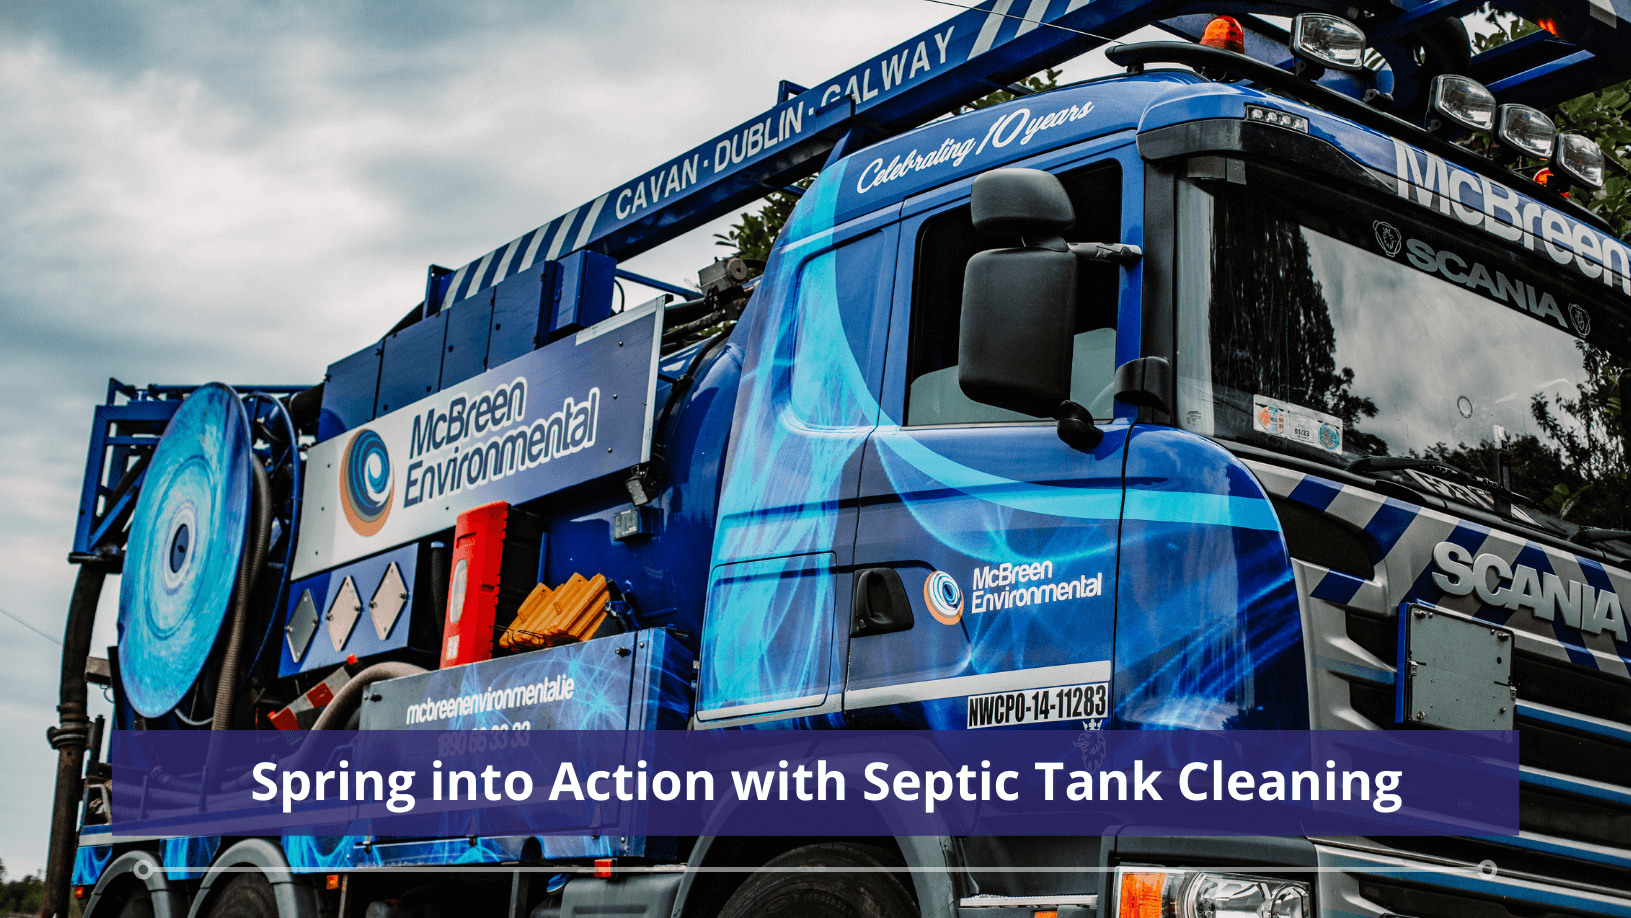 Spring into Action with Septic Tank Cleaning this March